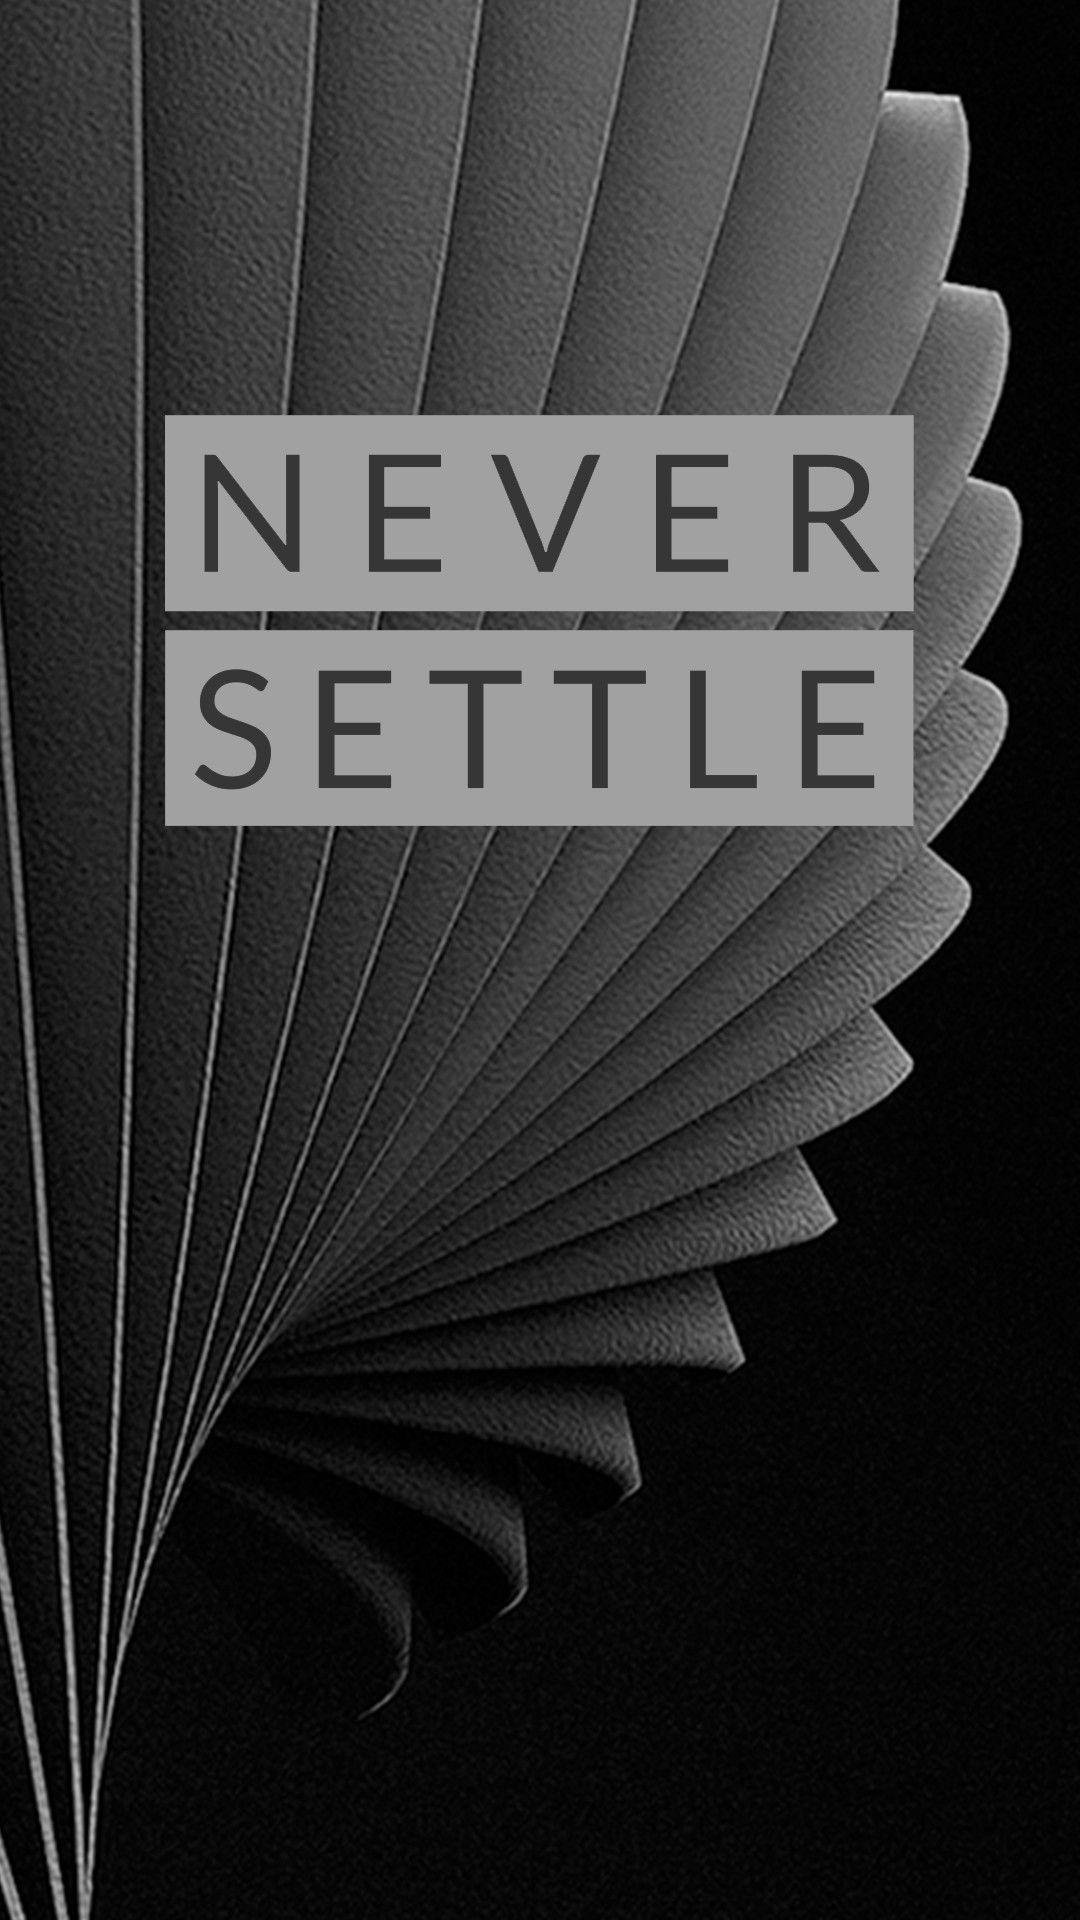 Never settle - one plus